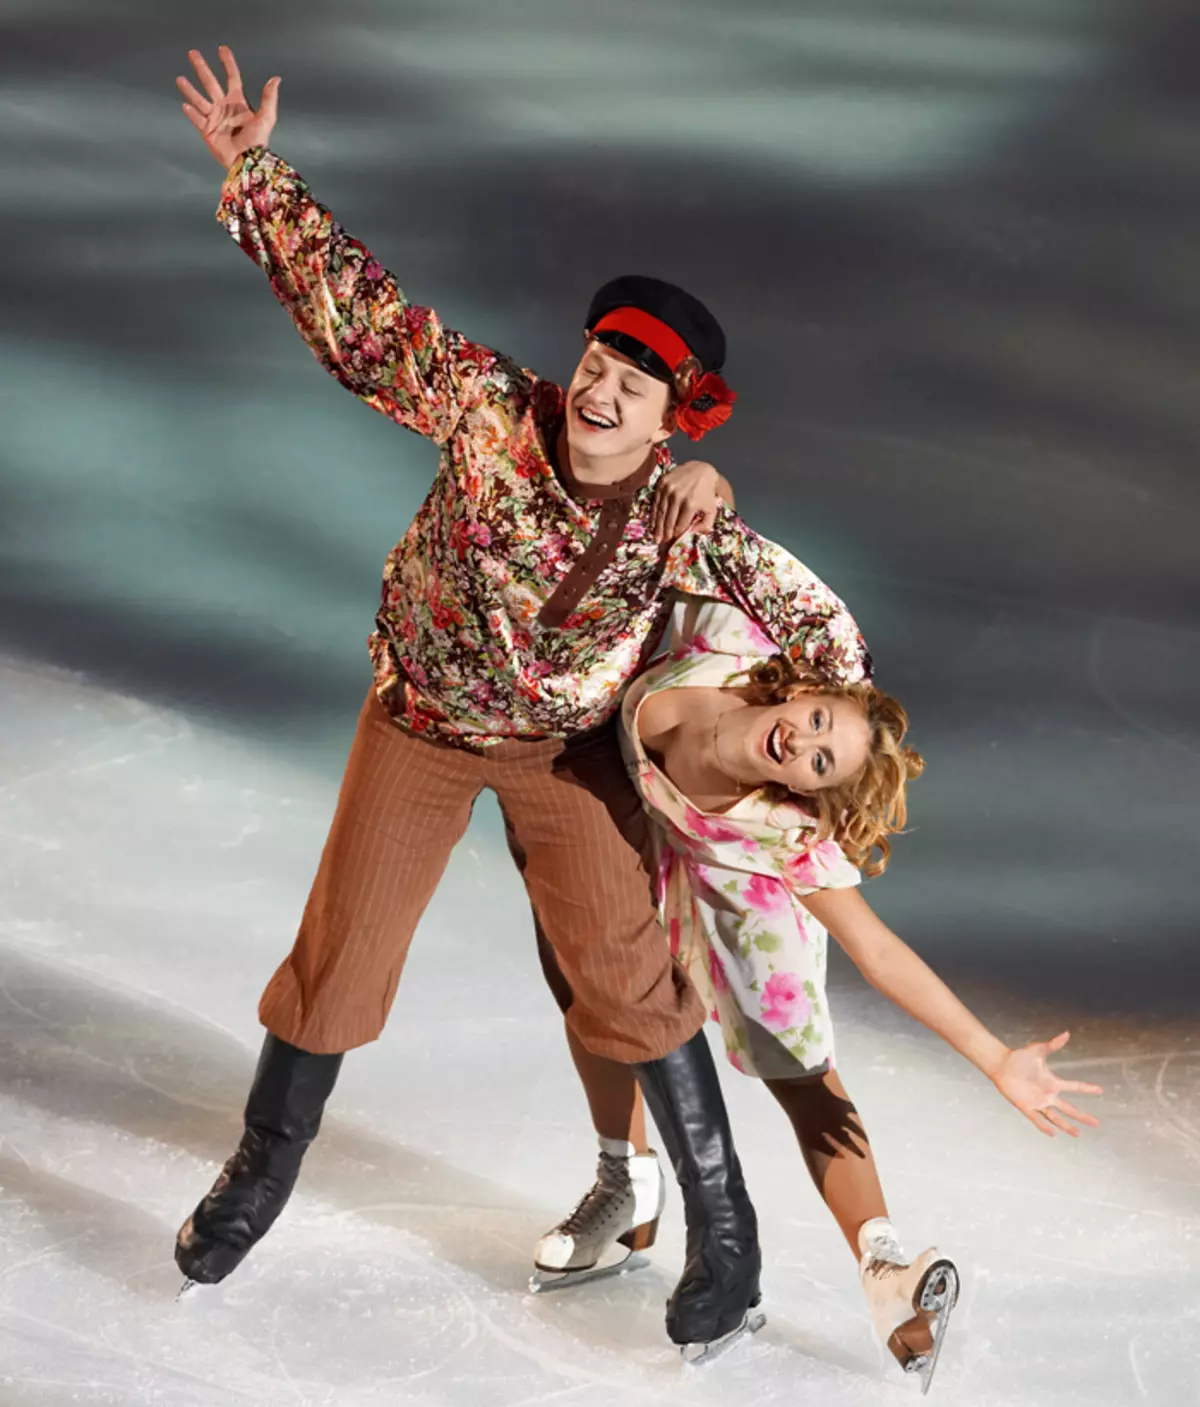 Bright performances of Marat in the ice show with Tatiana Navka attracted the attention of the whole country